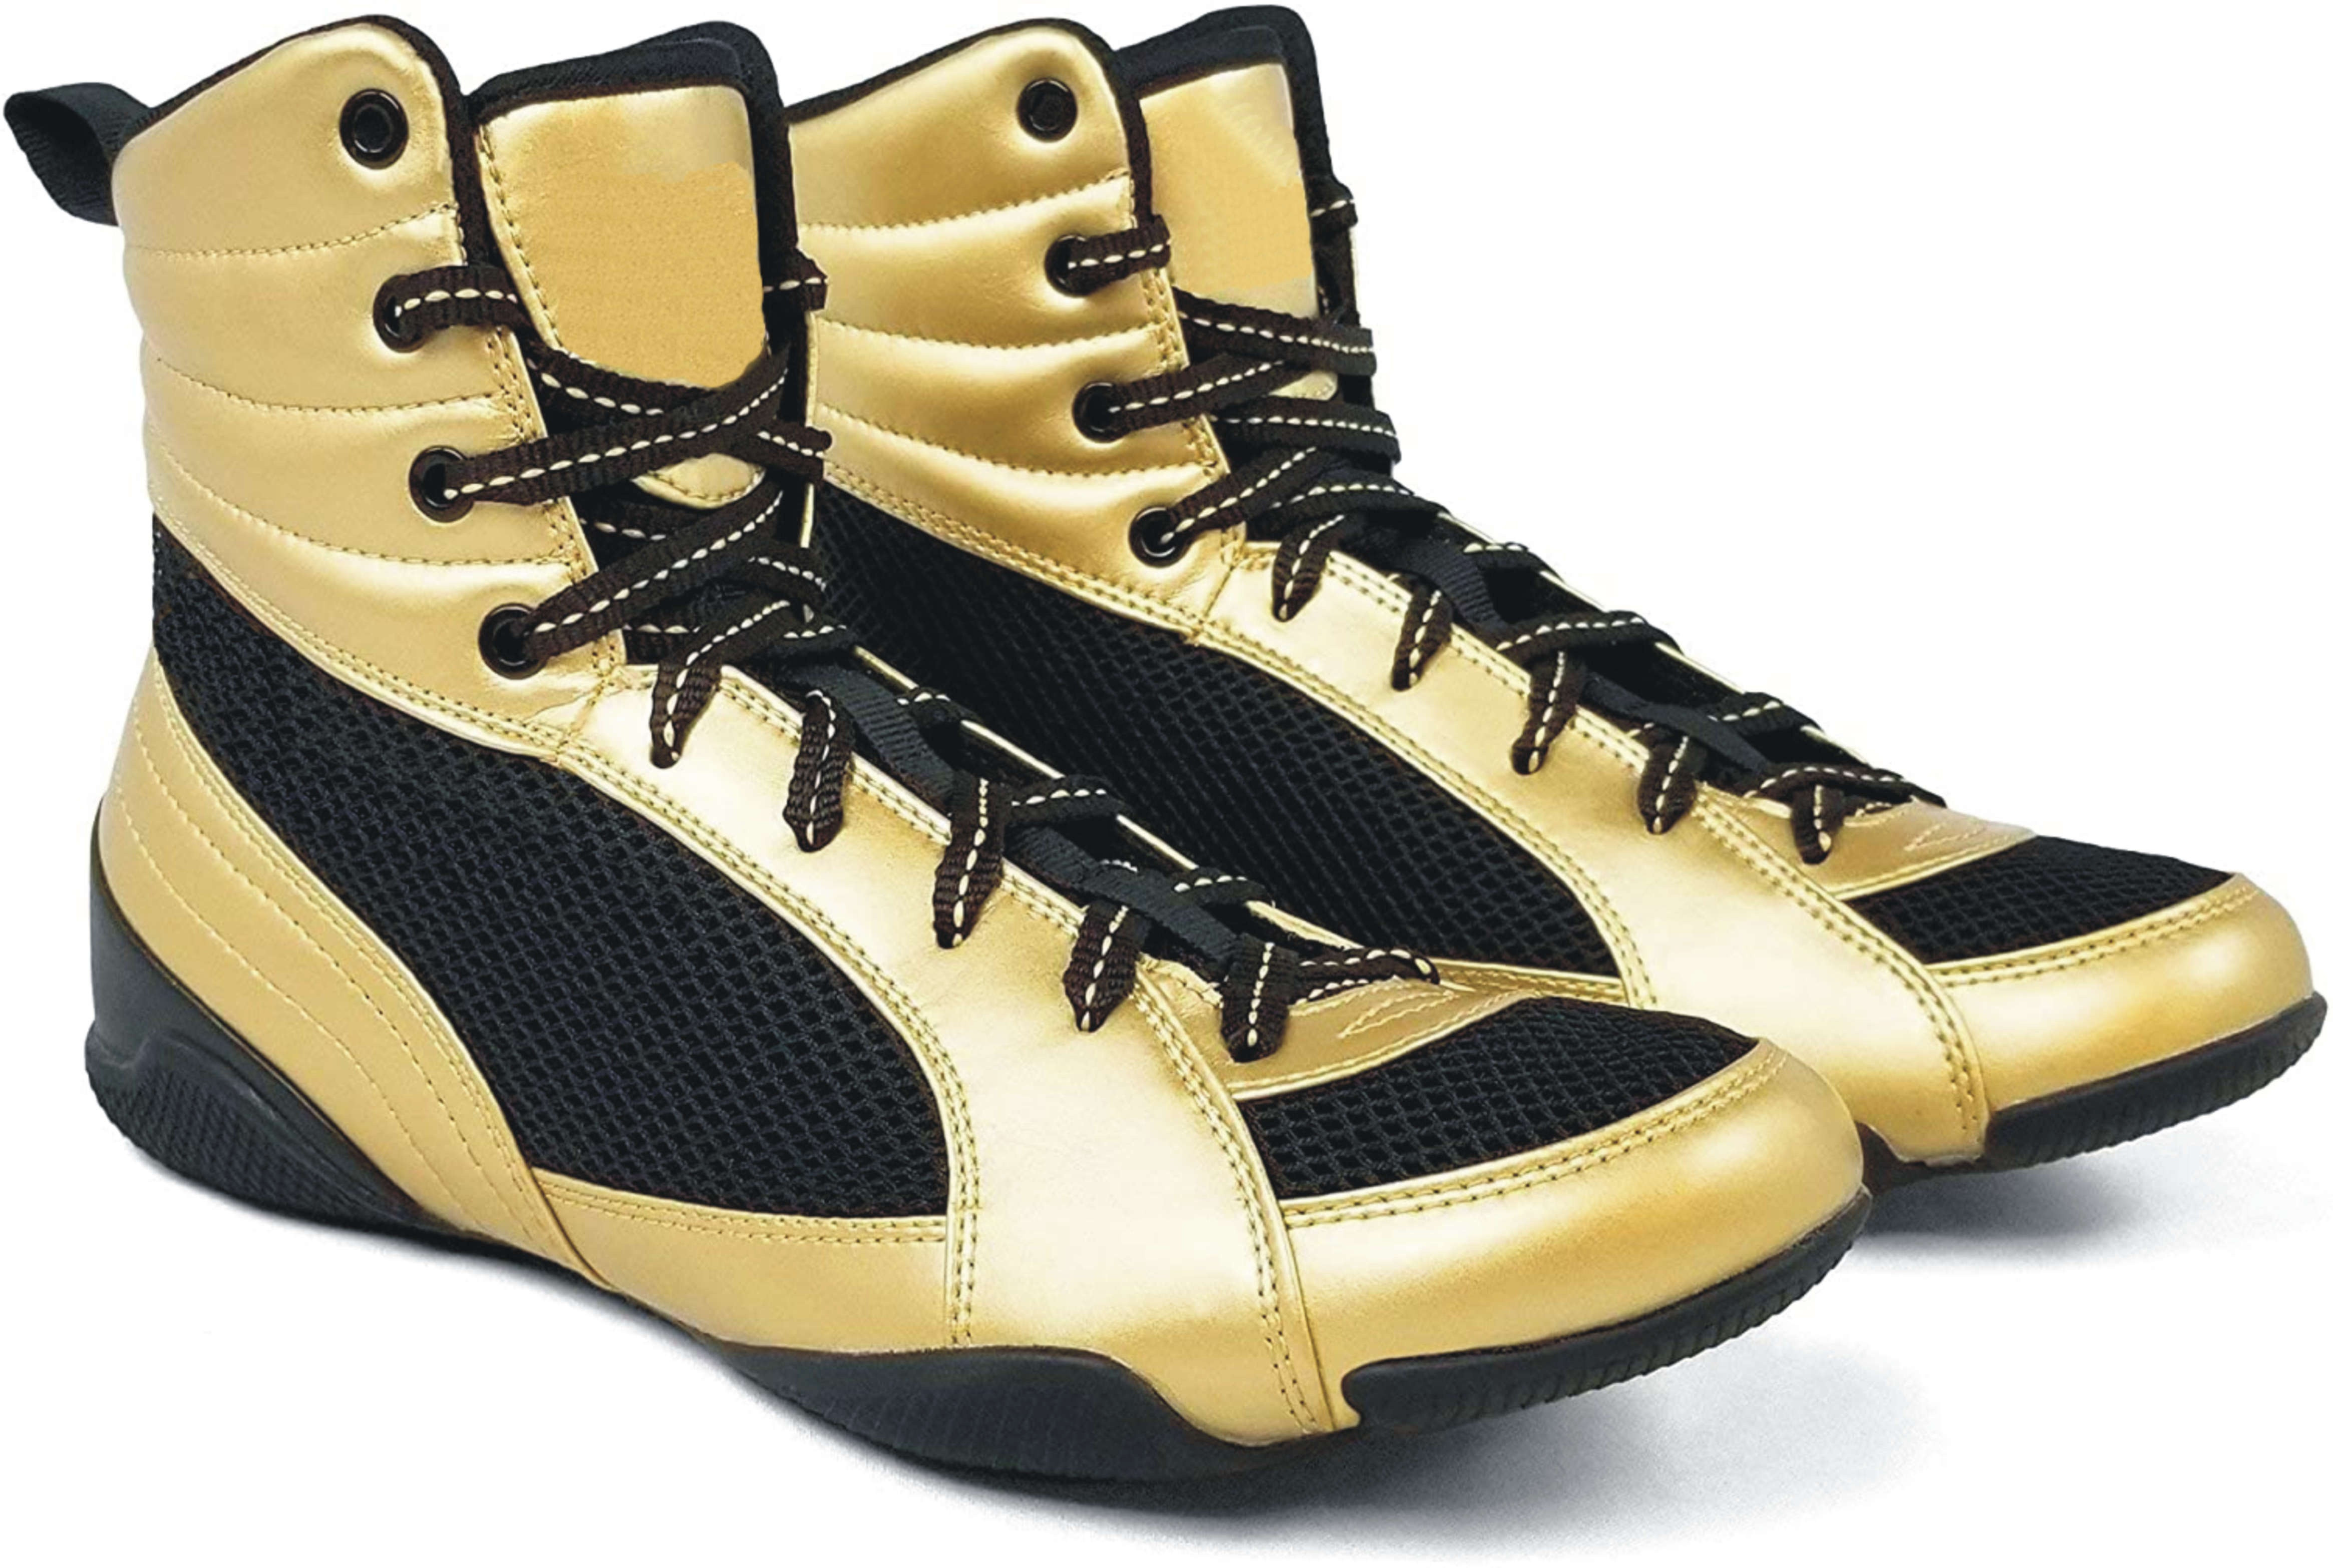 Boxing Shoes: Affordable Boxing Shoes & Boots